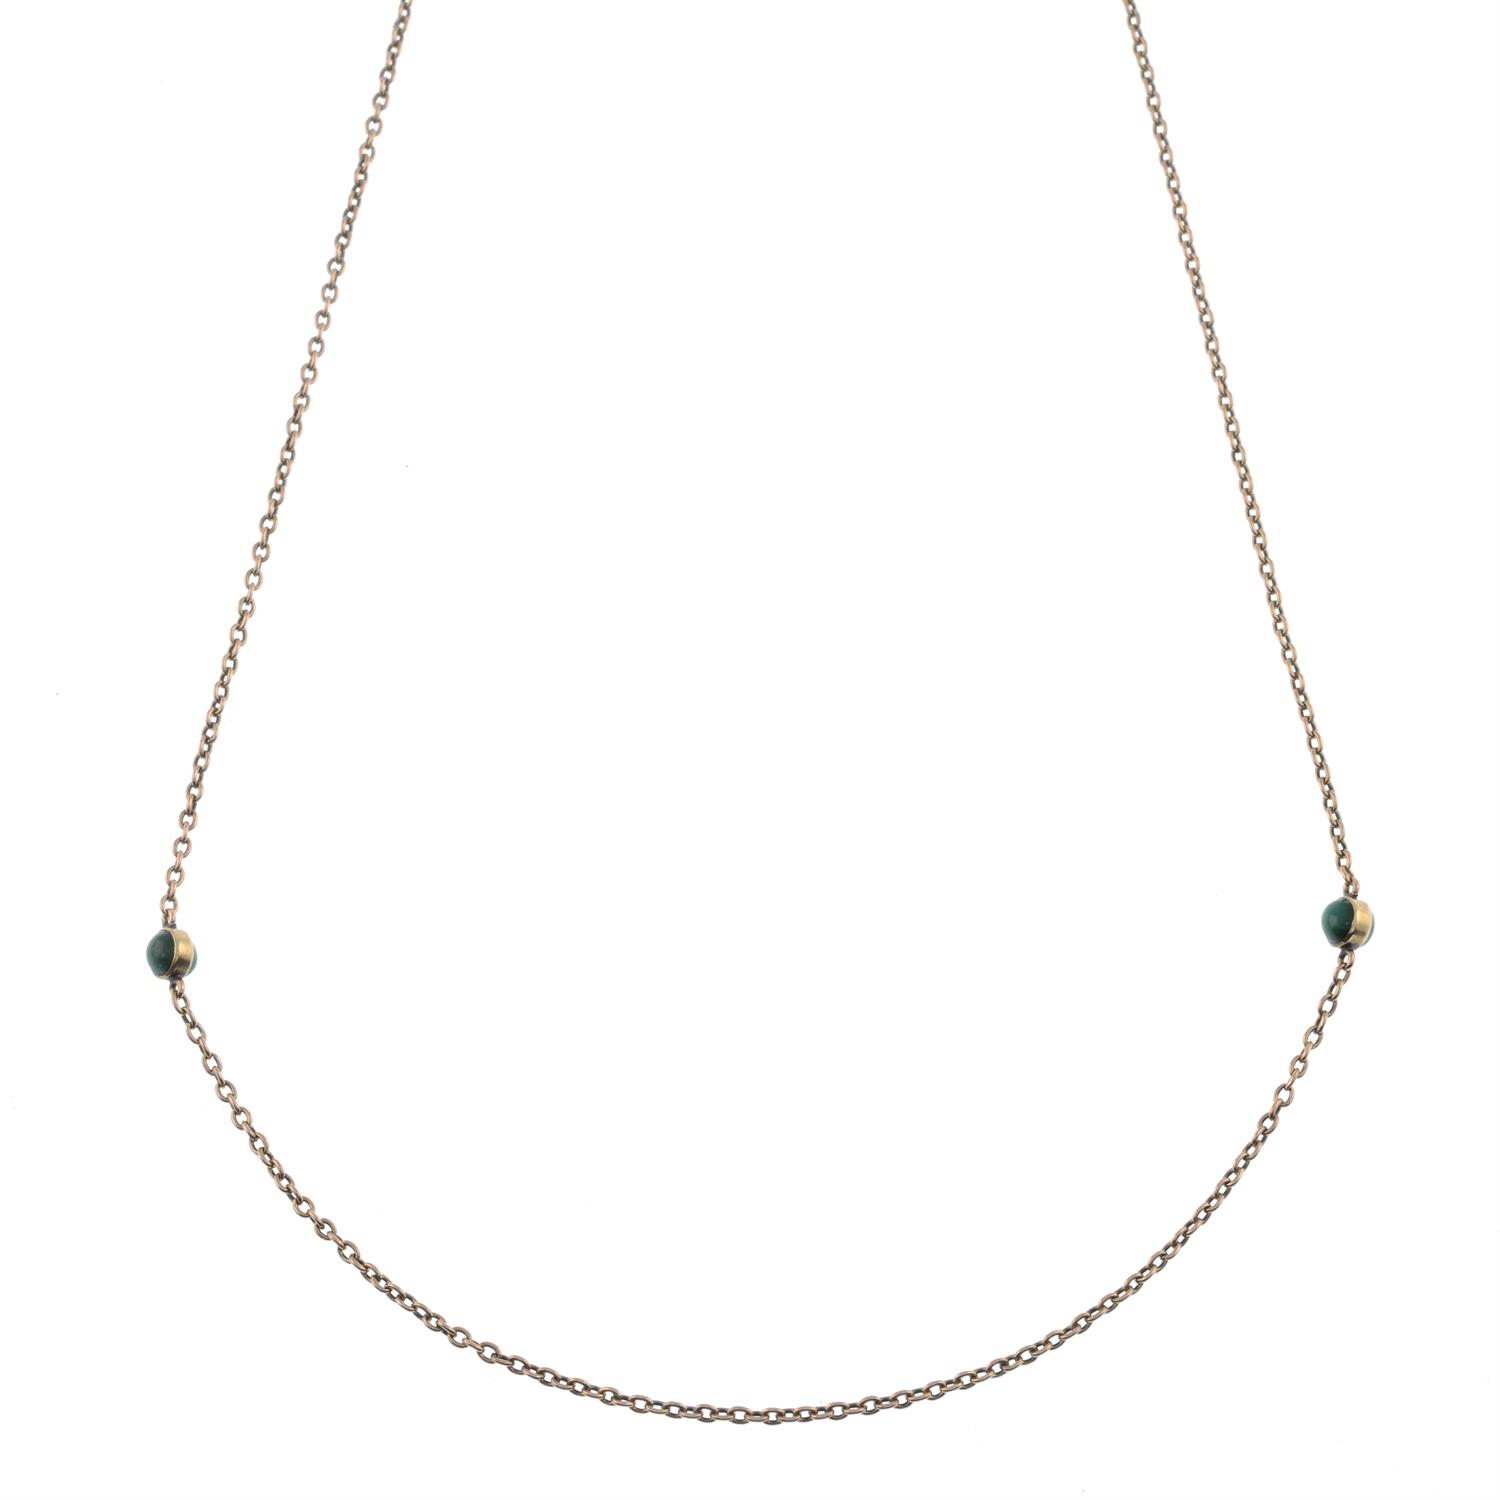 Early 20th century 9ct gold necklace, with turquoise spacers